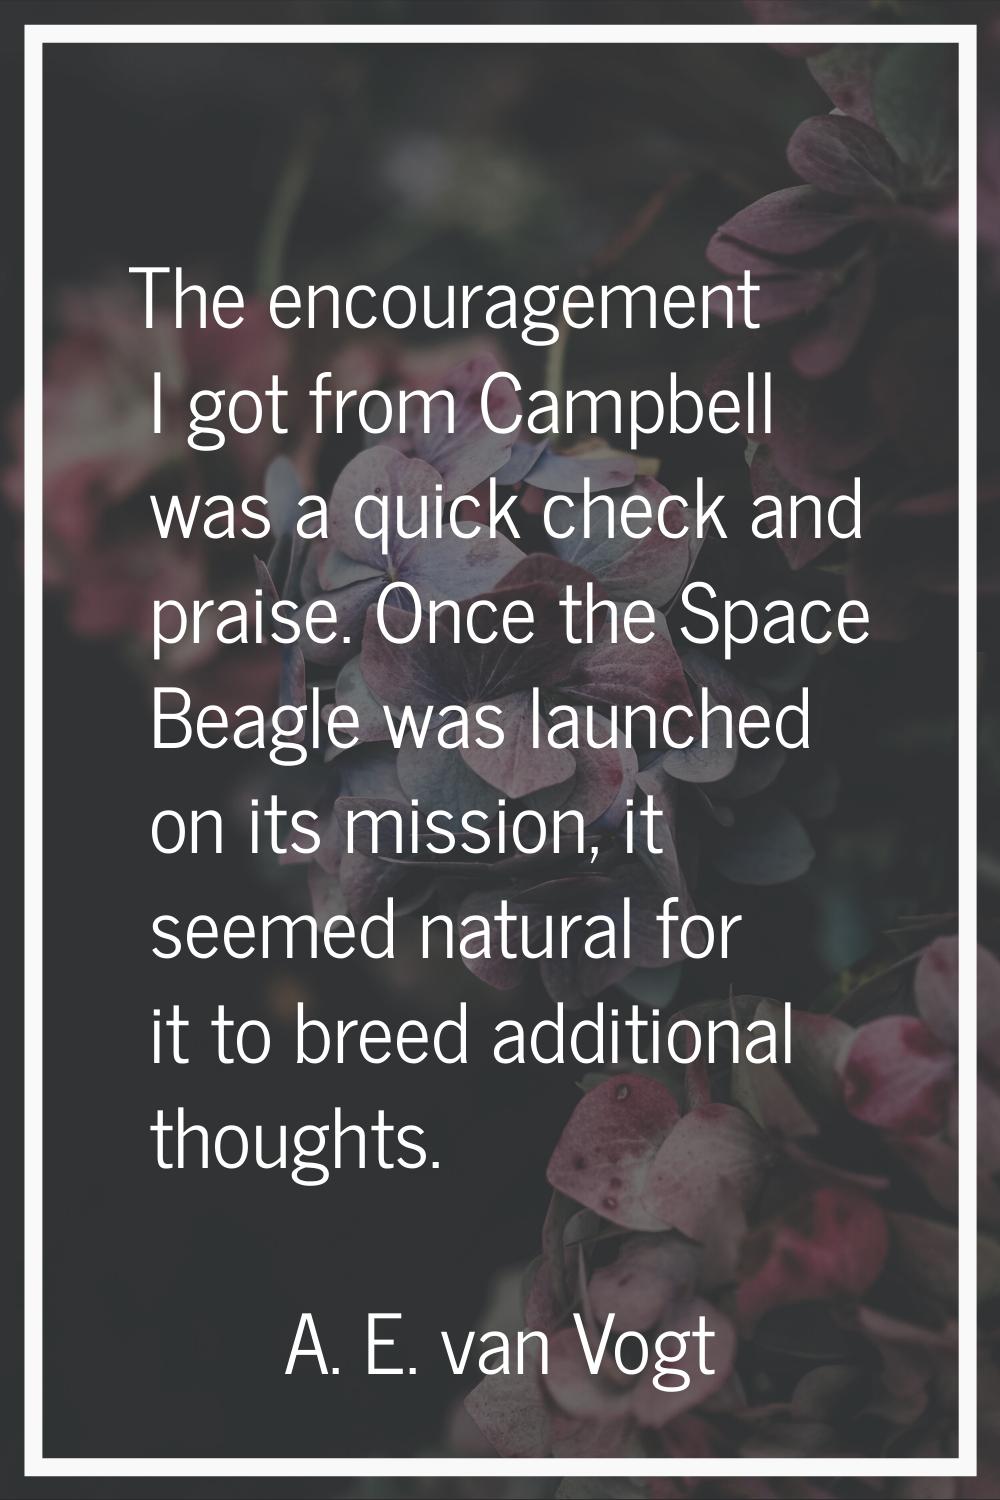 The encouragement I got from Campbell was a quick check and praise. Once the Space Beagle was launc